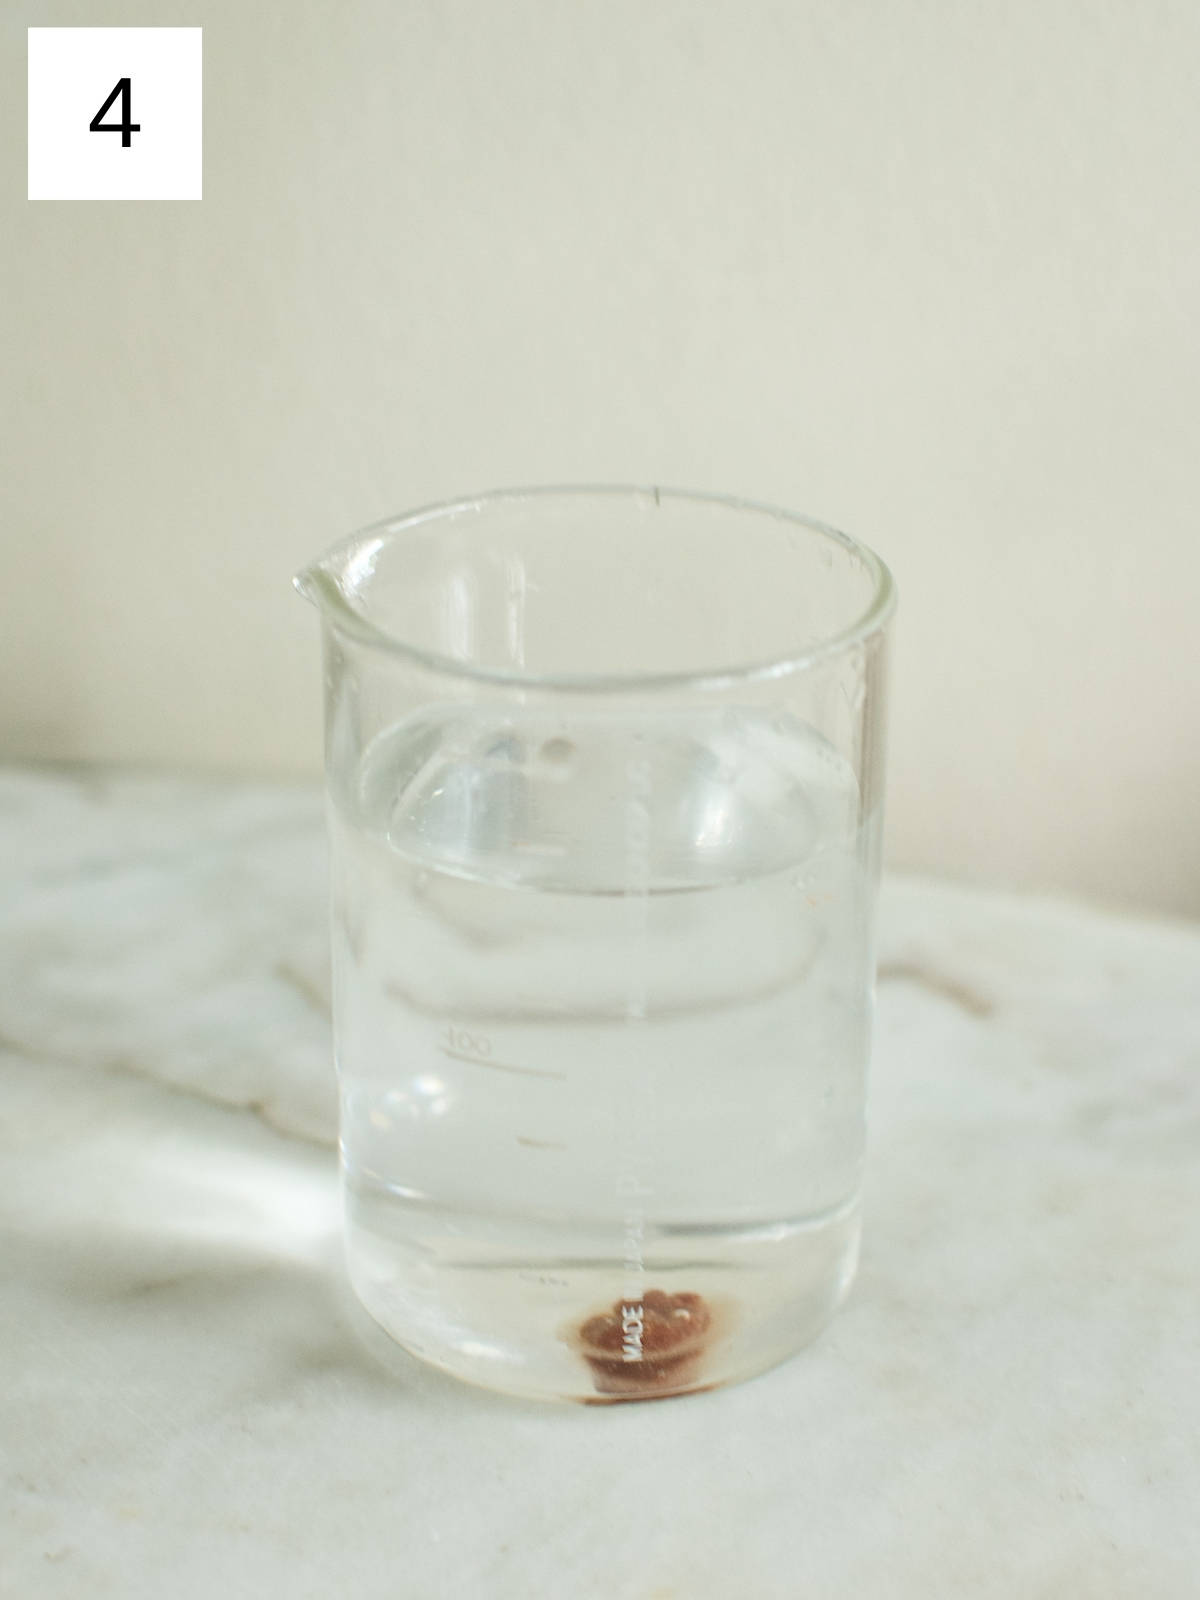 A droplet of cocoa mixture in a glass of room temperature water.